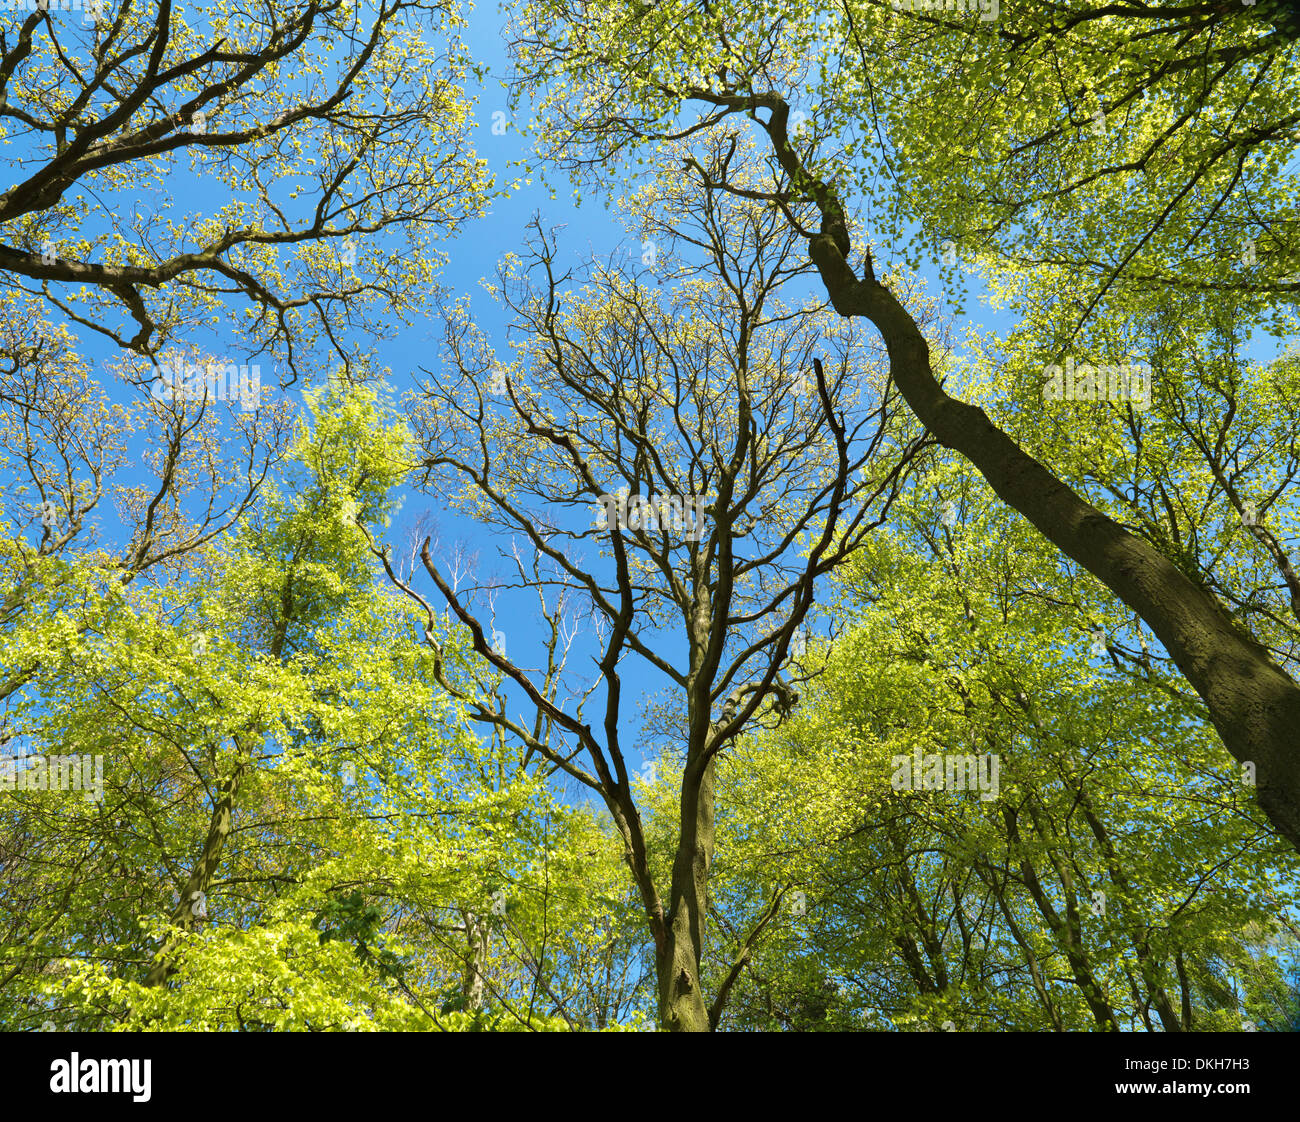 A study of the tree canopy at Blickling Woods, Norfolk, England, United Kingdom, Europe Stock Photo